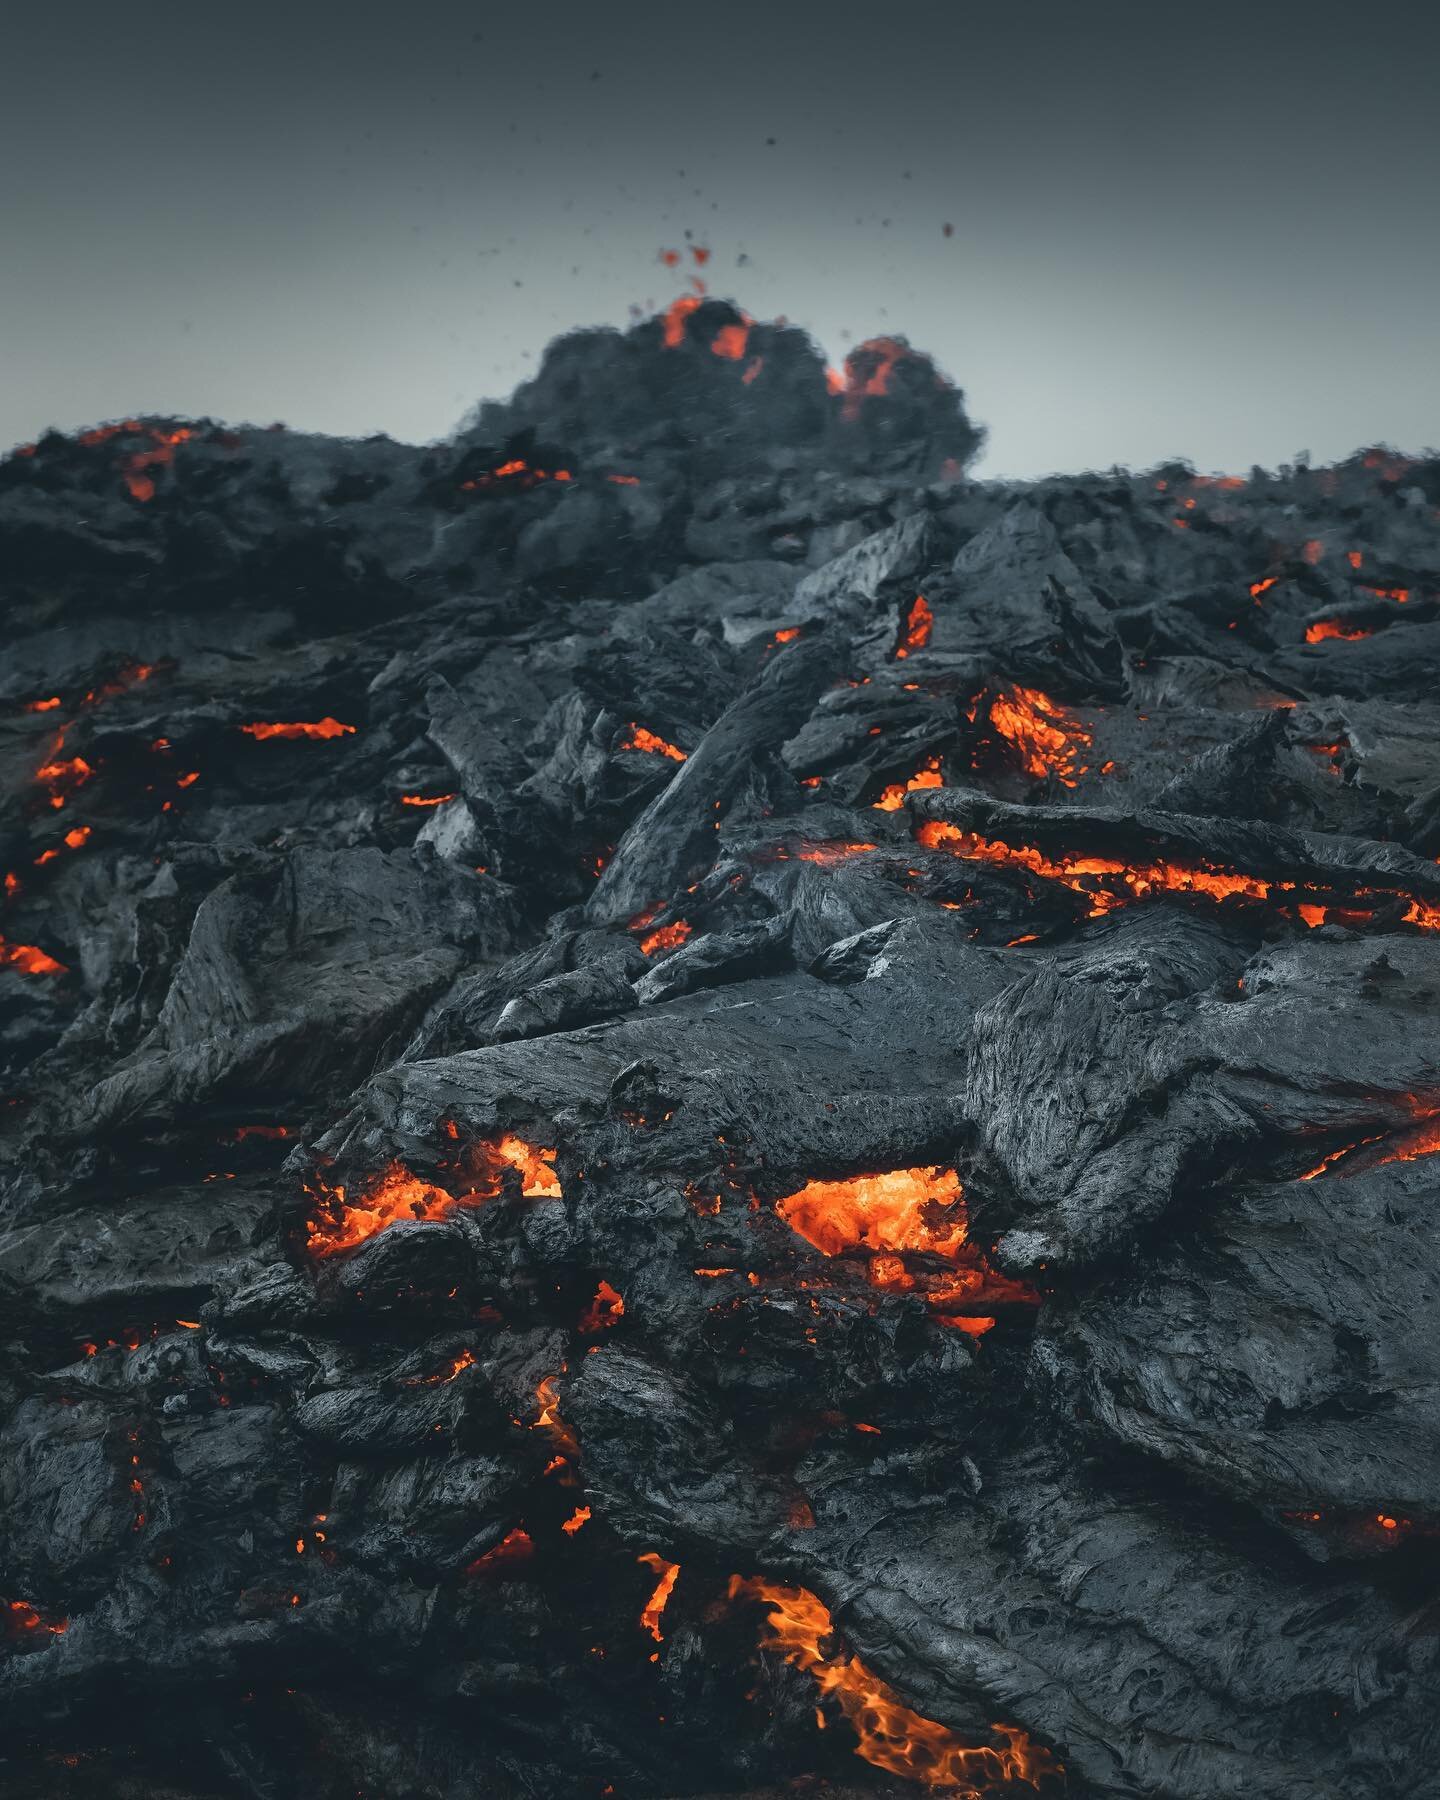 Feeling the heat. It&lsquo;s unreal how hot it gets within a few meters of the edge of the lava. Probably shouldn&lsquo;t come as a surprise but still a very special experience going from shivering cold to sweating in a matter of seconds. 

Follow 